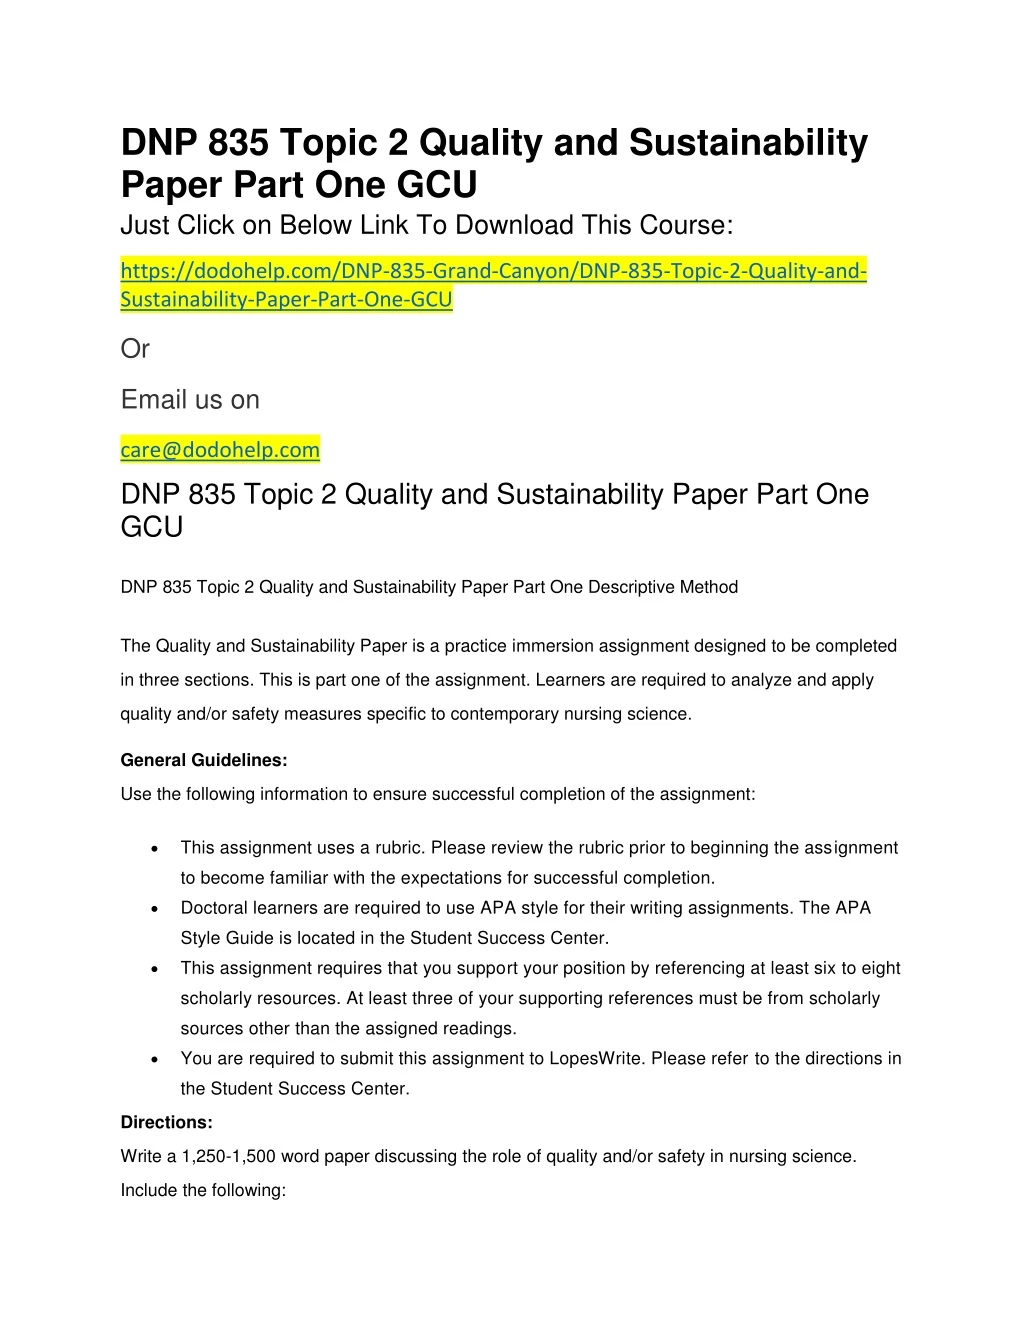 dnp 835 topic 2 quality and sustainability paper